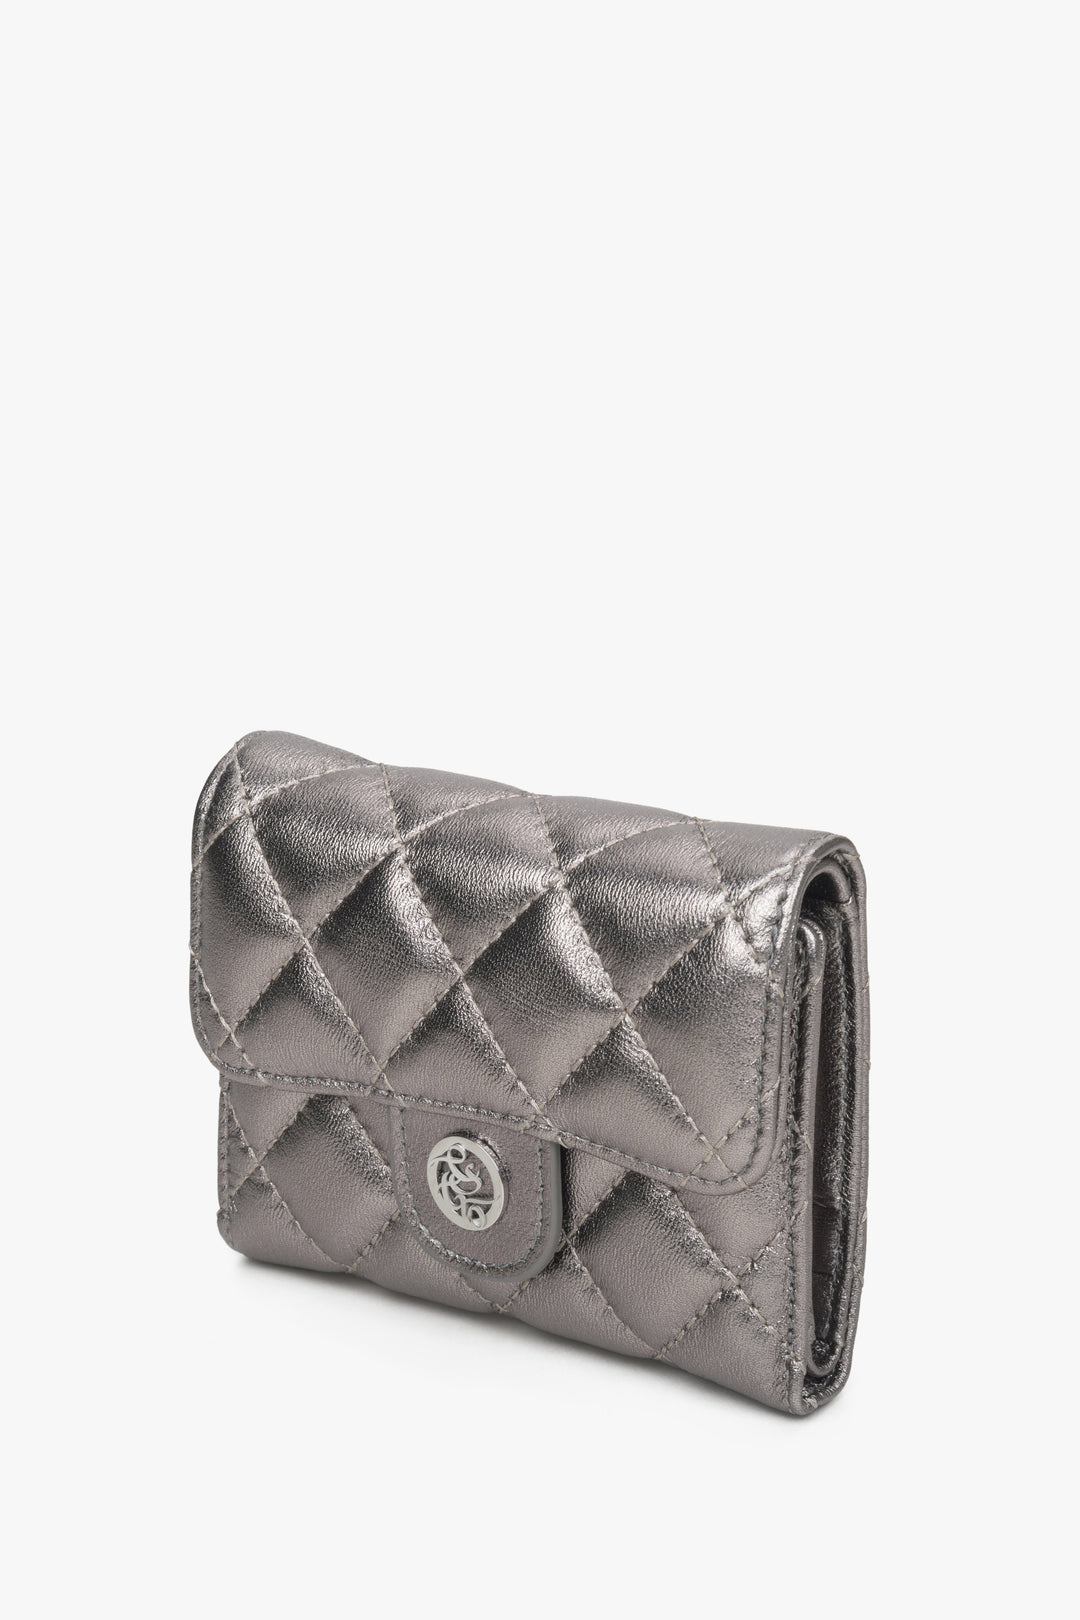 Women's tri-fold silver wallet with embossing.